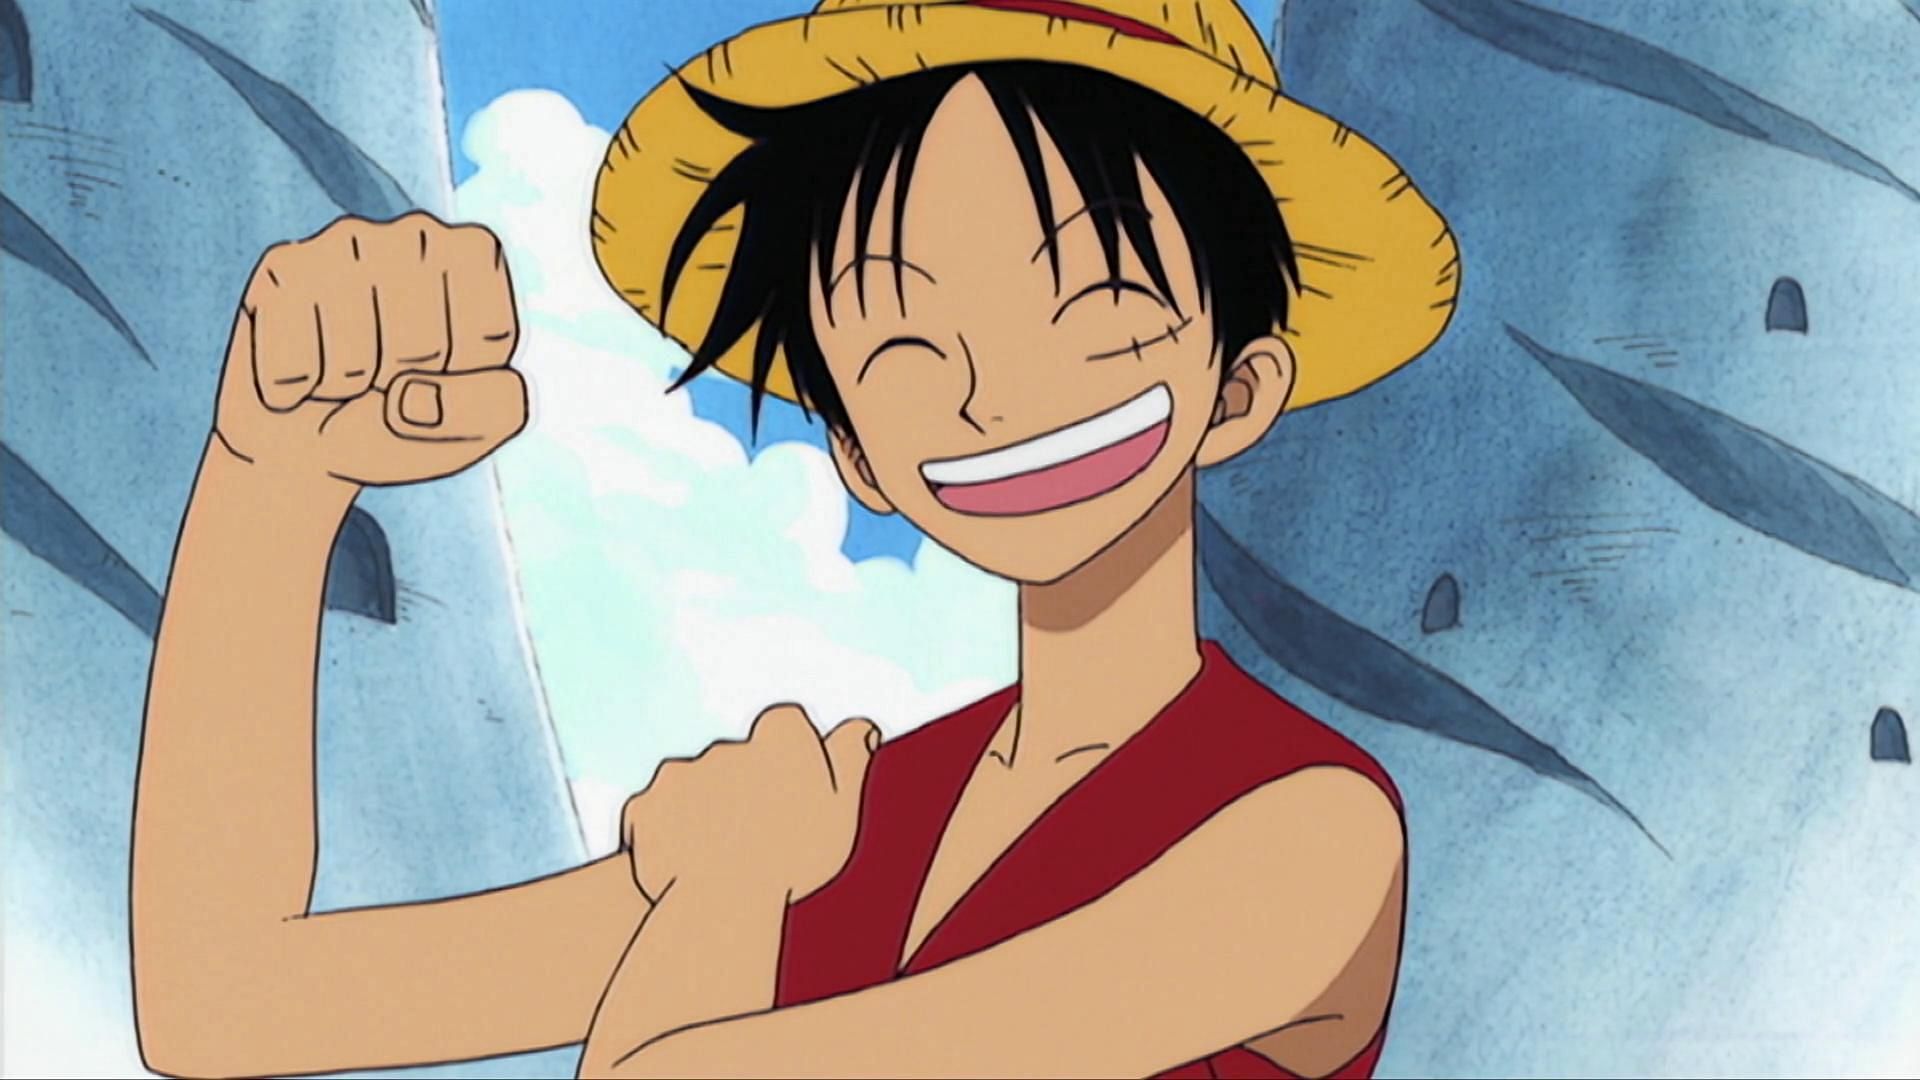 If One Piece took place in the real world, Luffy would be Brazilian, Oda says (Image via Toei Animation, One Piece)